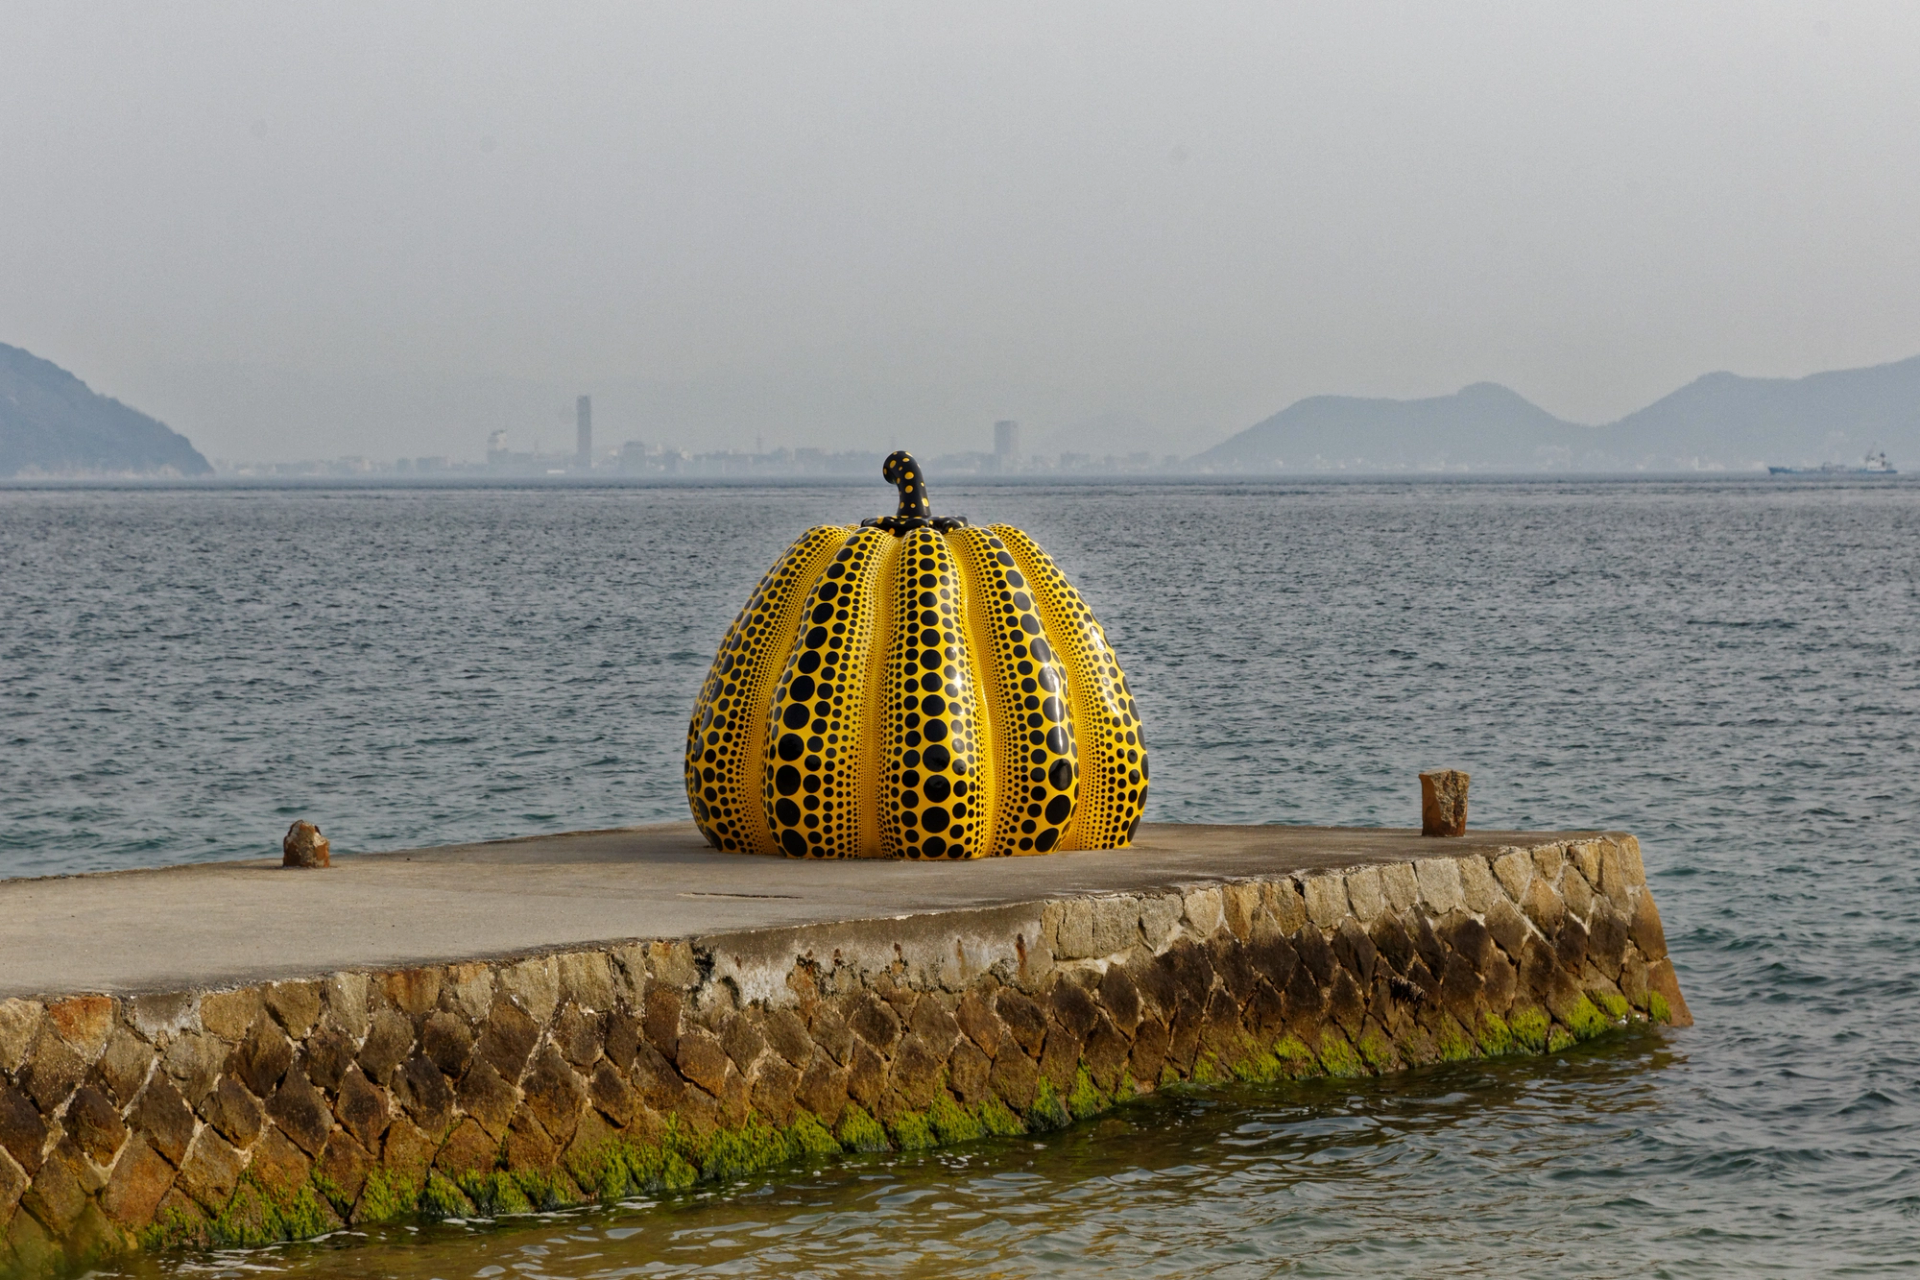 One of Yayoi Kusama's giant pumpkin sculptures is depicted against a harbour scene.